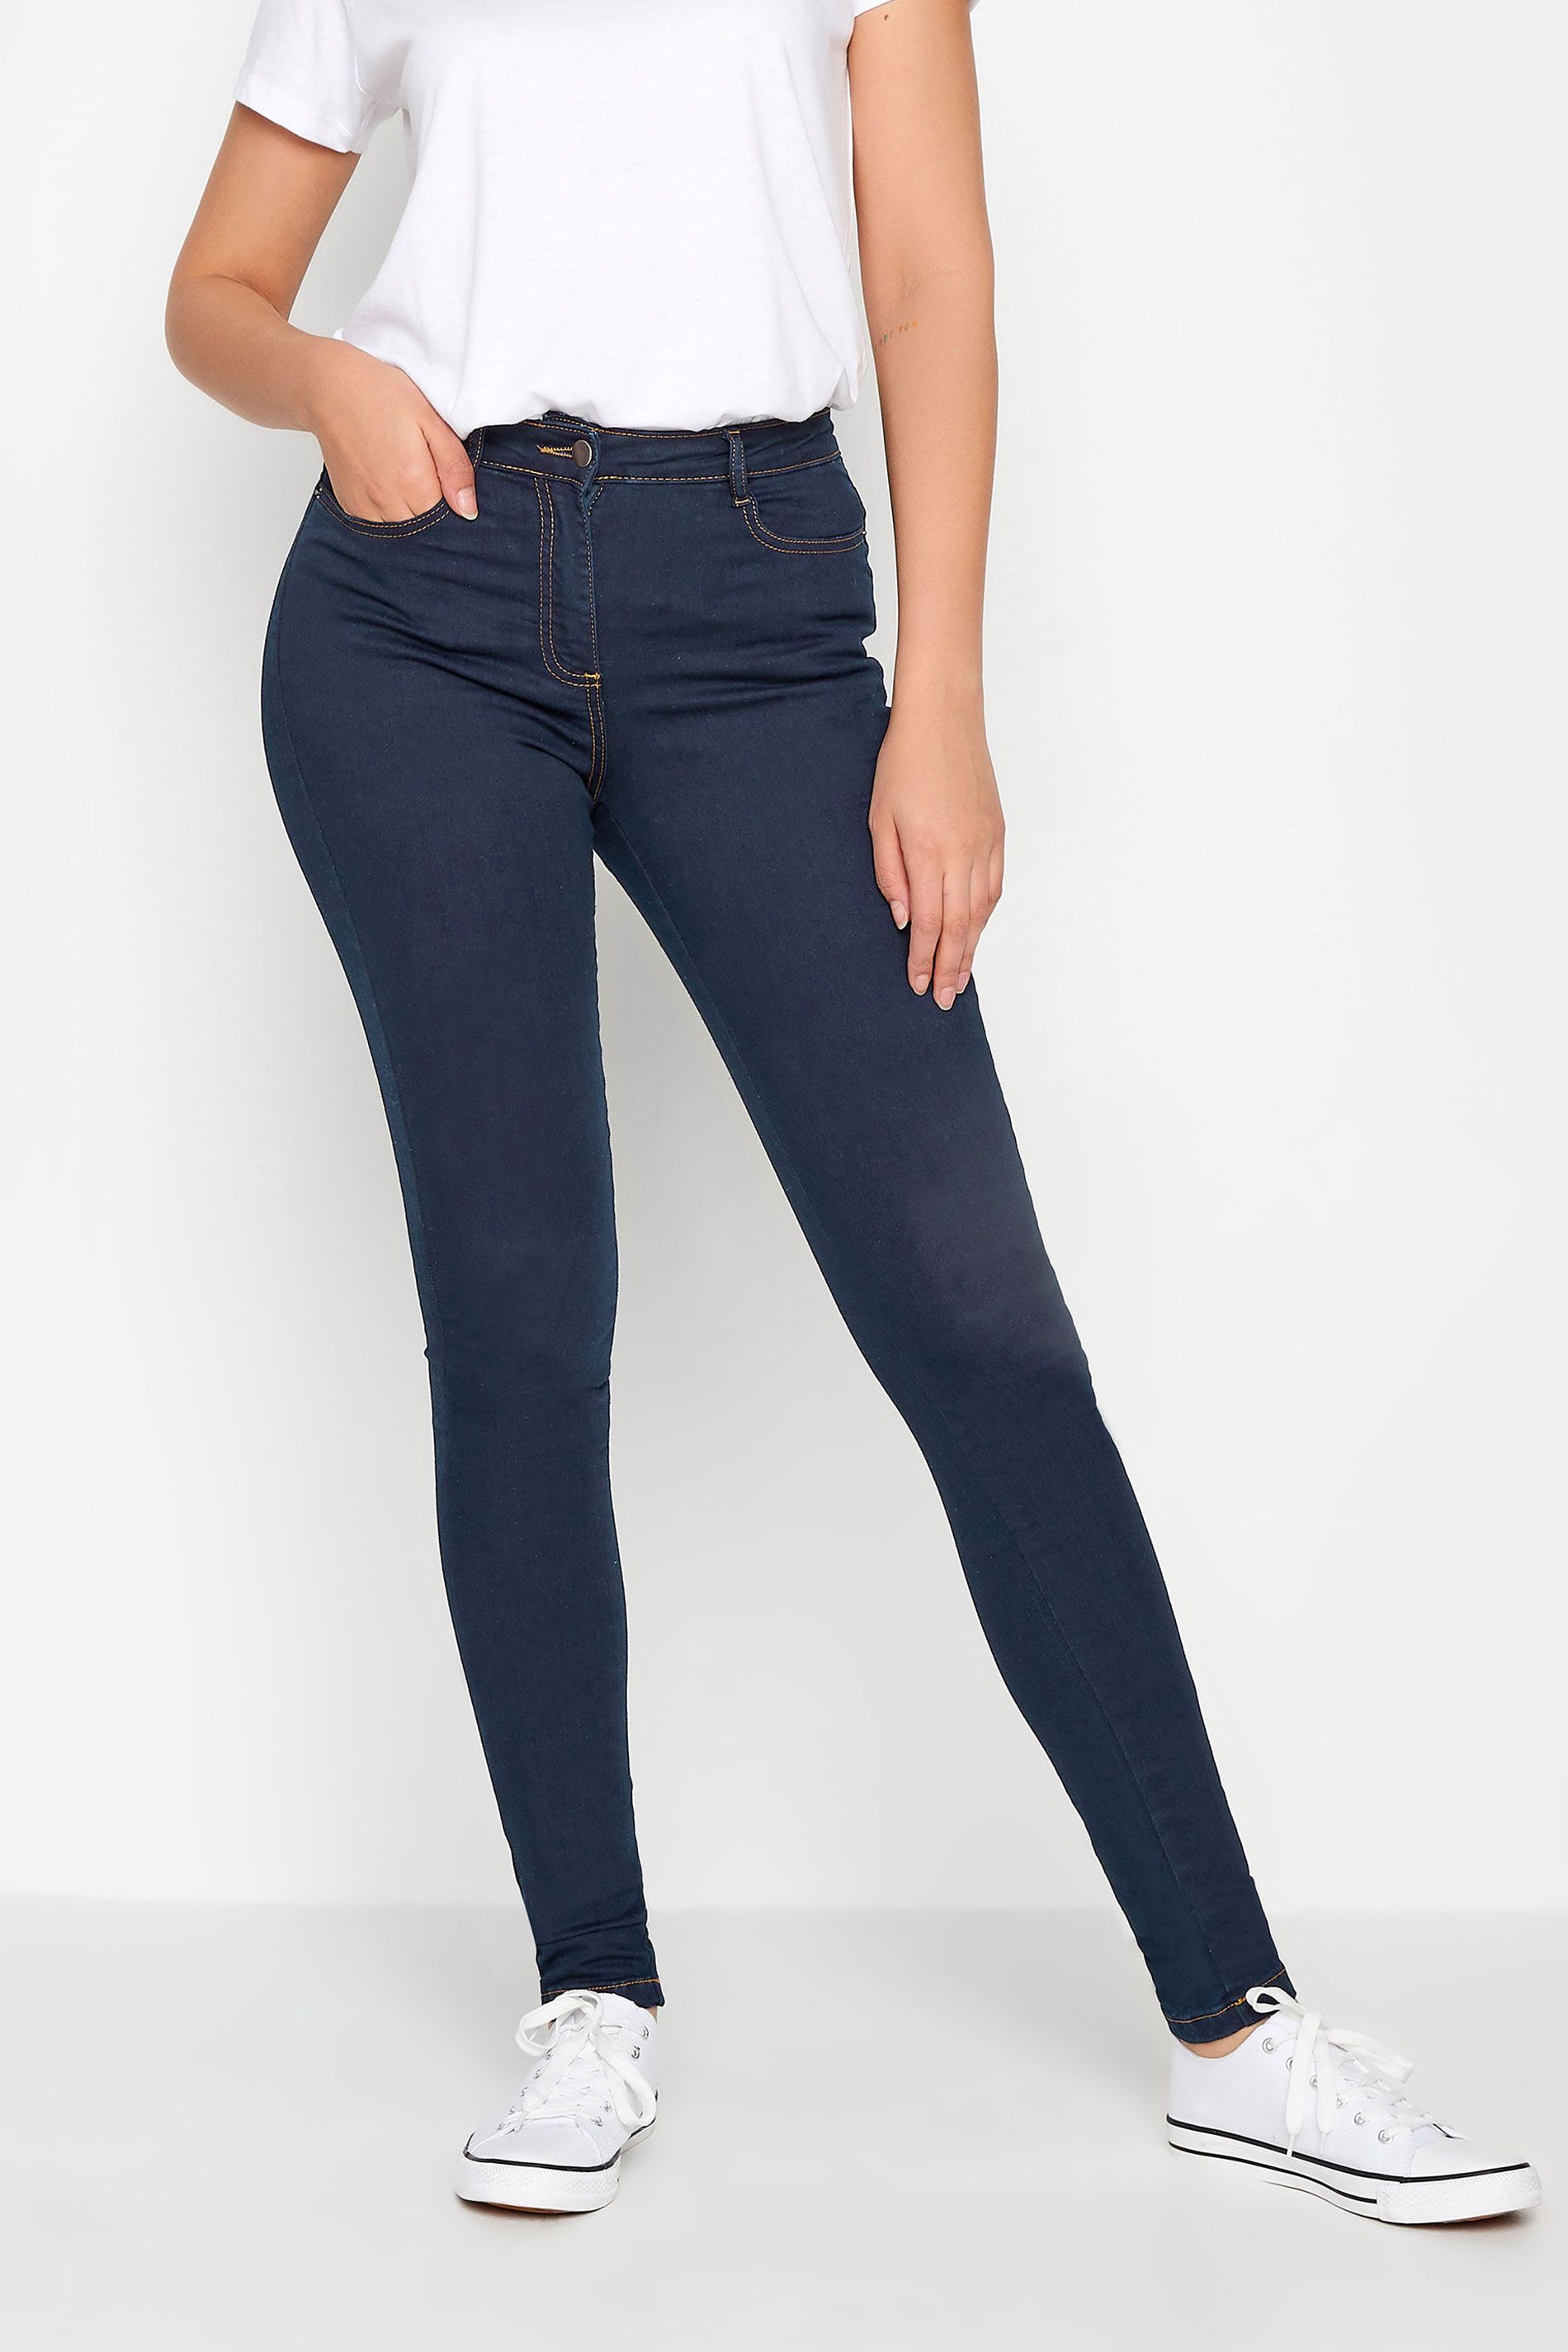 LTS Tall Indigo Blue Washed AVA Stretch Skinny Jeans | Long Tall Sally